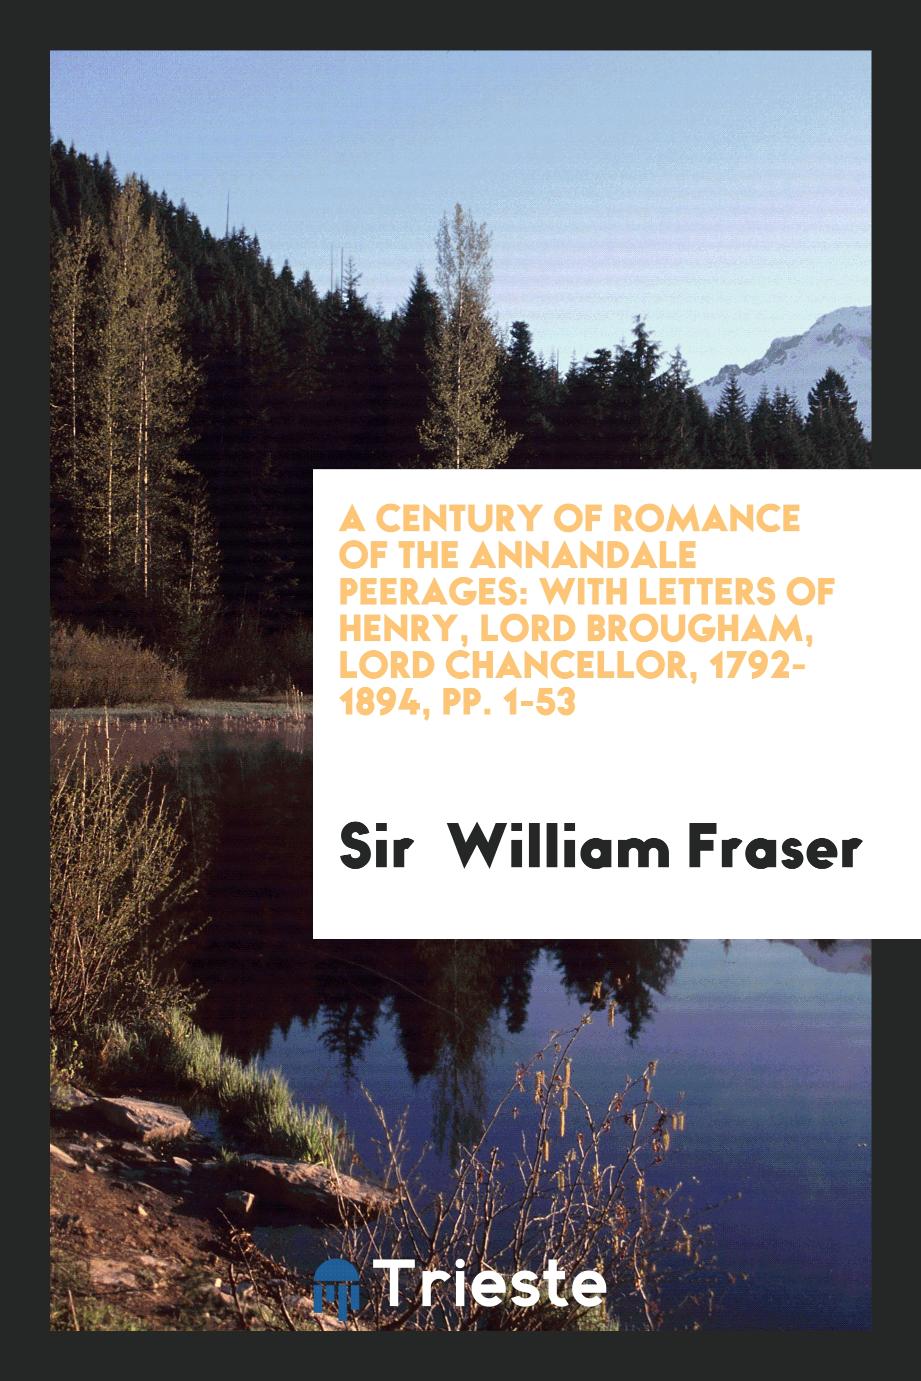 A Century of Romance of the Annandale Peerages: With Letters of Henry, Lord Brougham, Lord Chancellor, 1792-1894, pp. 1-53